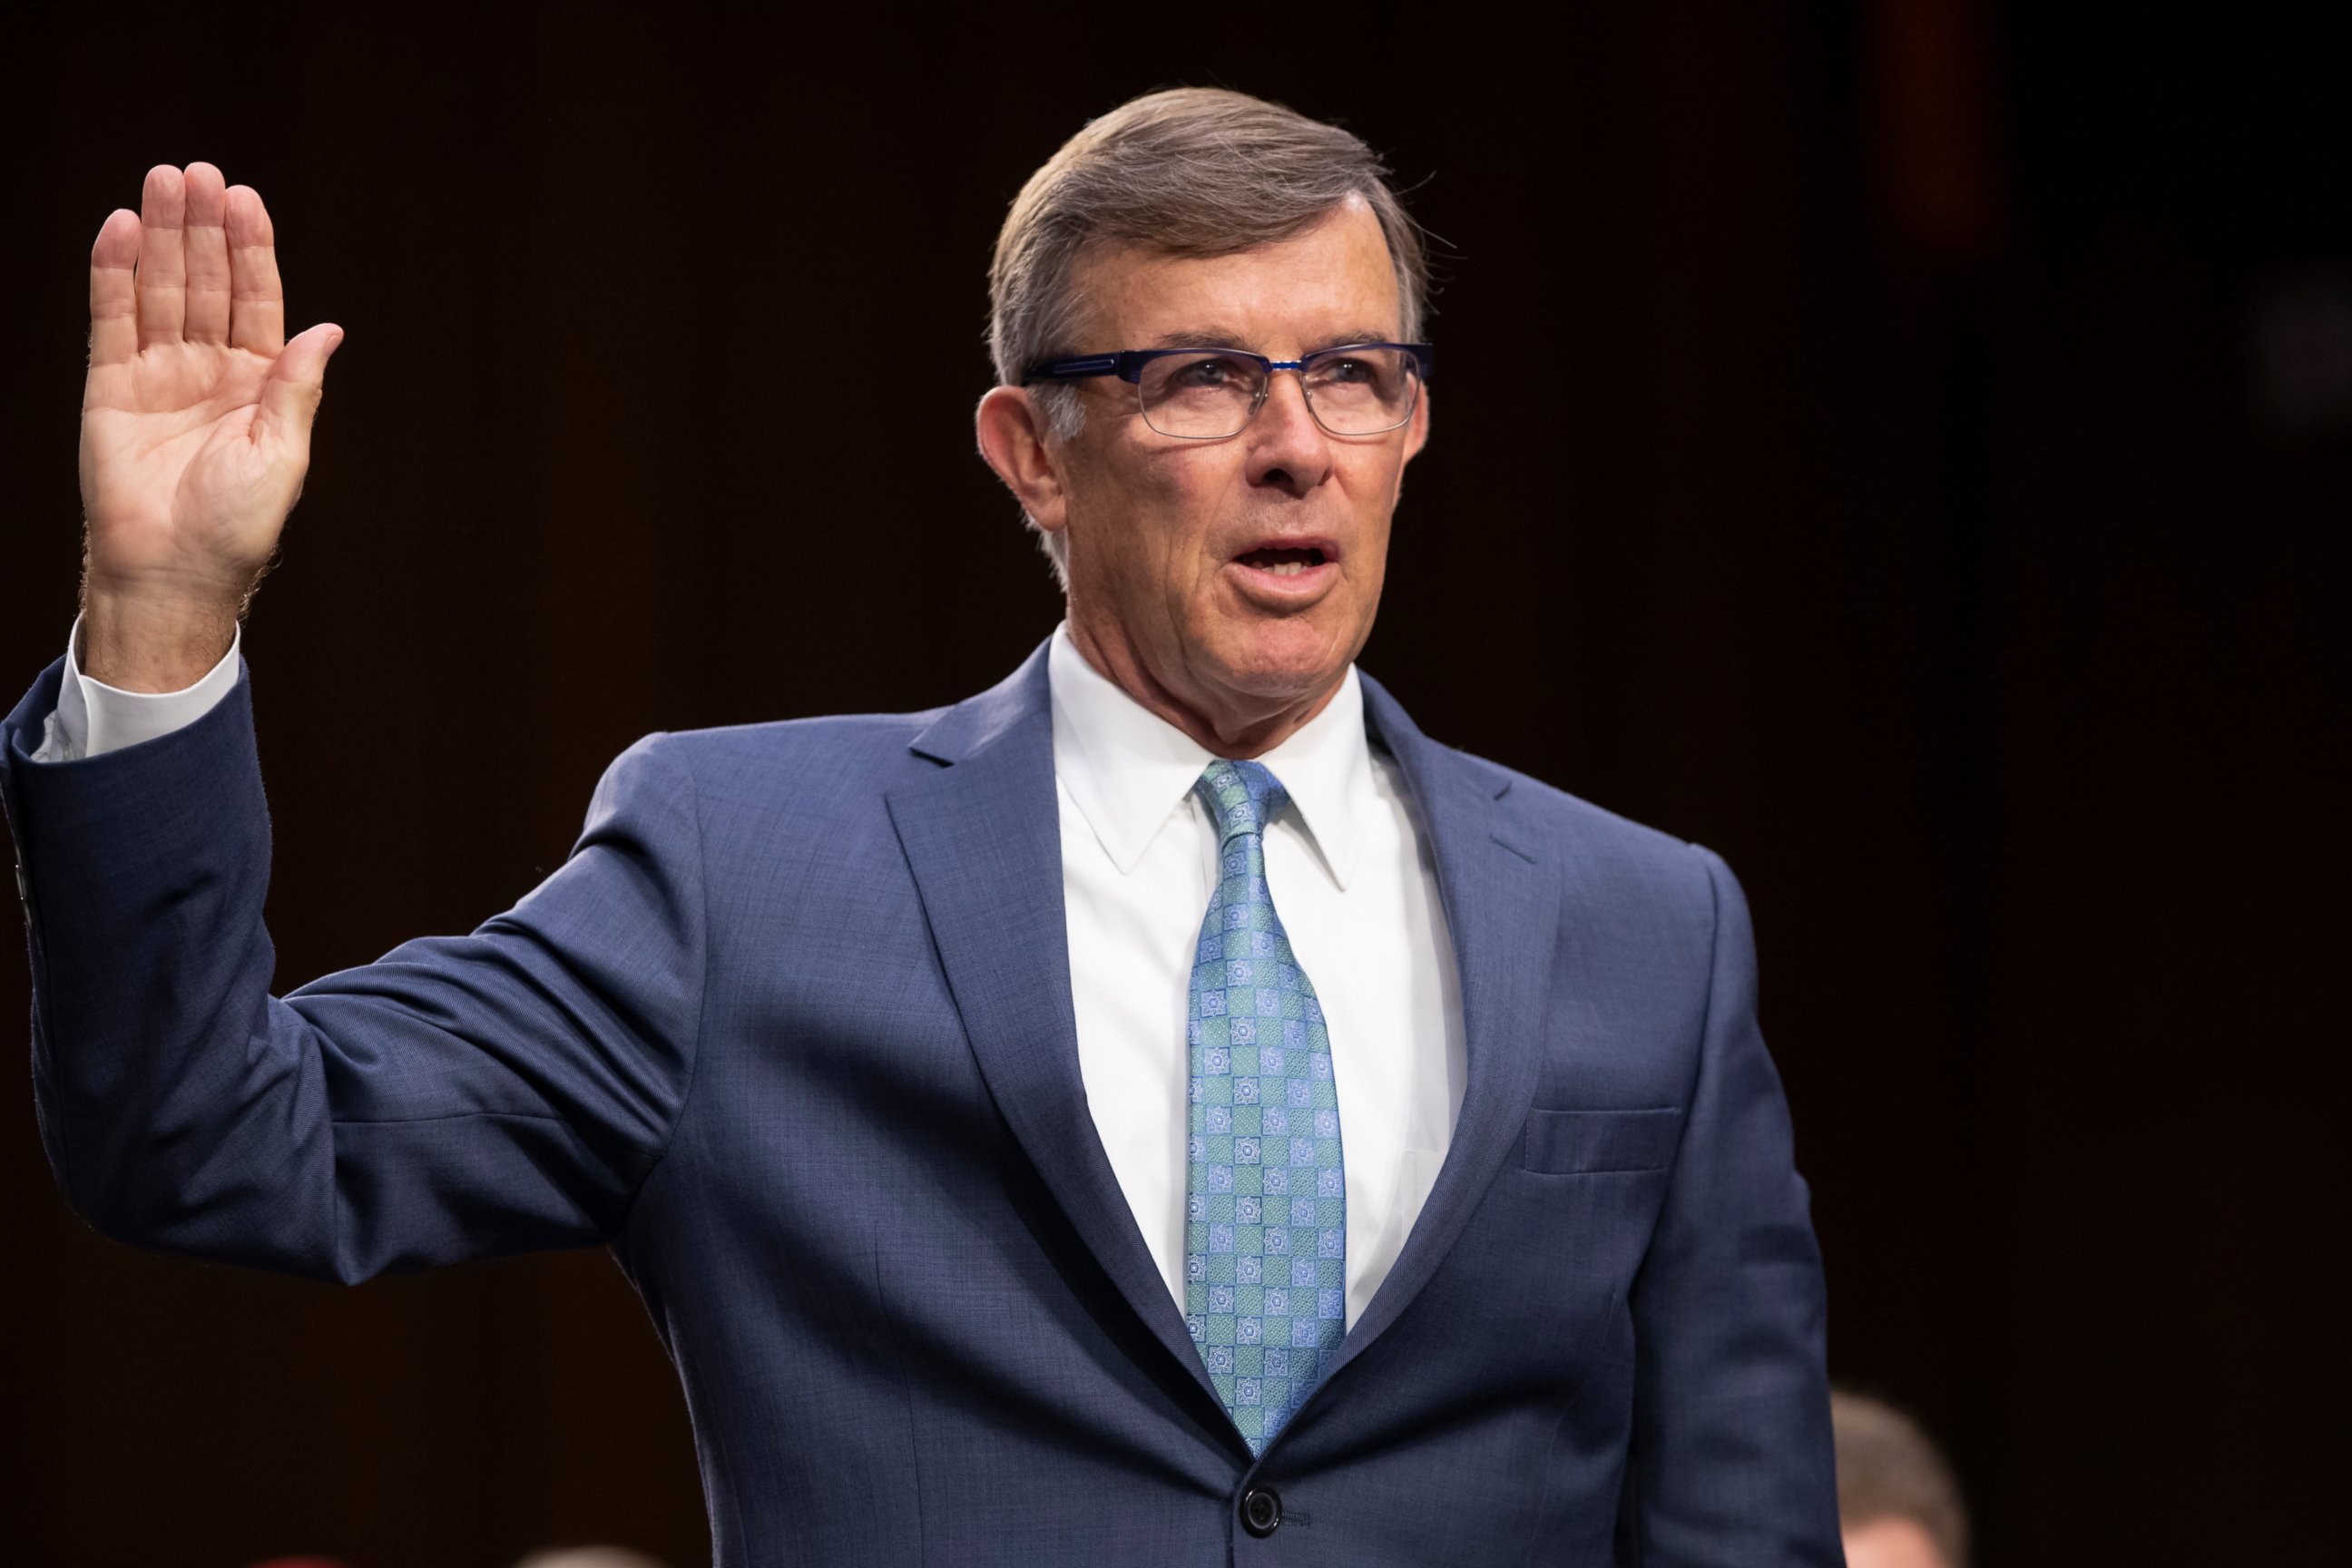 PHOTO: In this July 25, 2018, file photo, retired Vice Adm. Joseph Maguire and now current director of the National Counterterrorism Center, appears before the Senate Intelligence Committee on Capitol Hill in Washington.